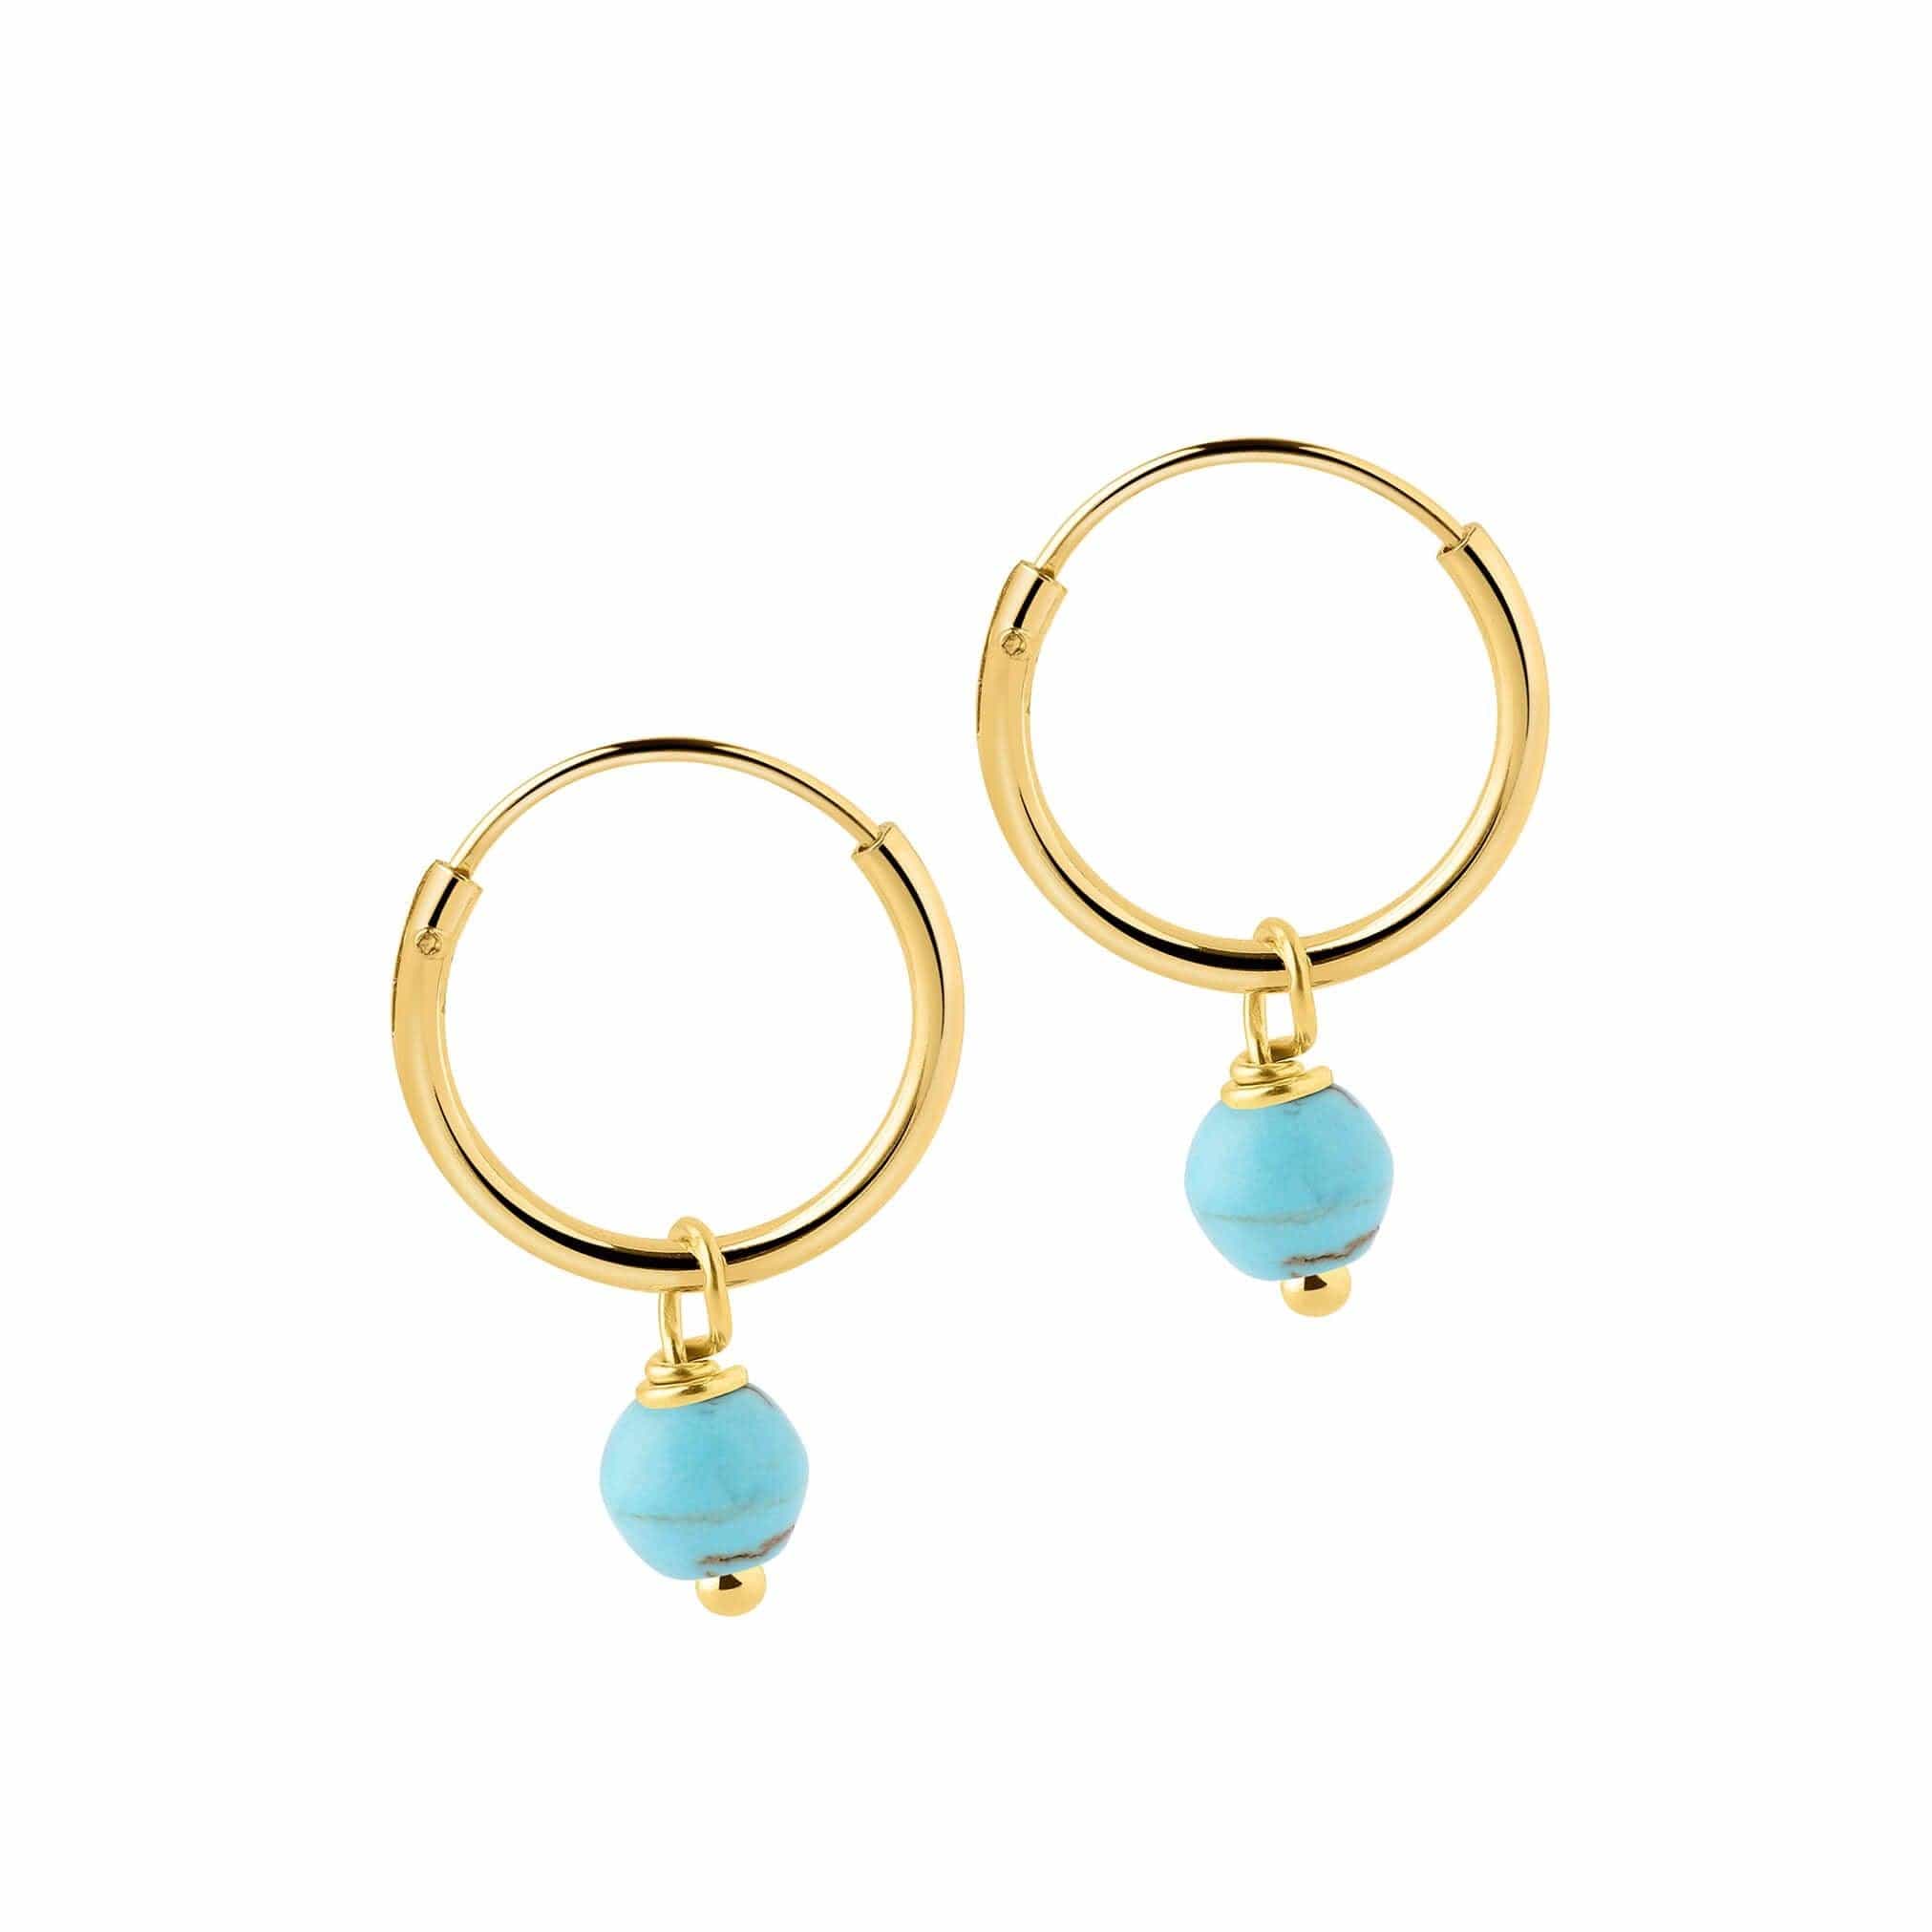 12 mm Gold plated Hoop Earrings Turquoise Blue Stone